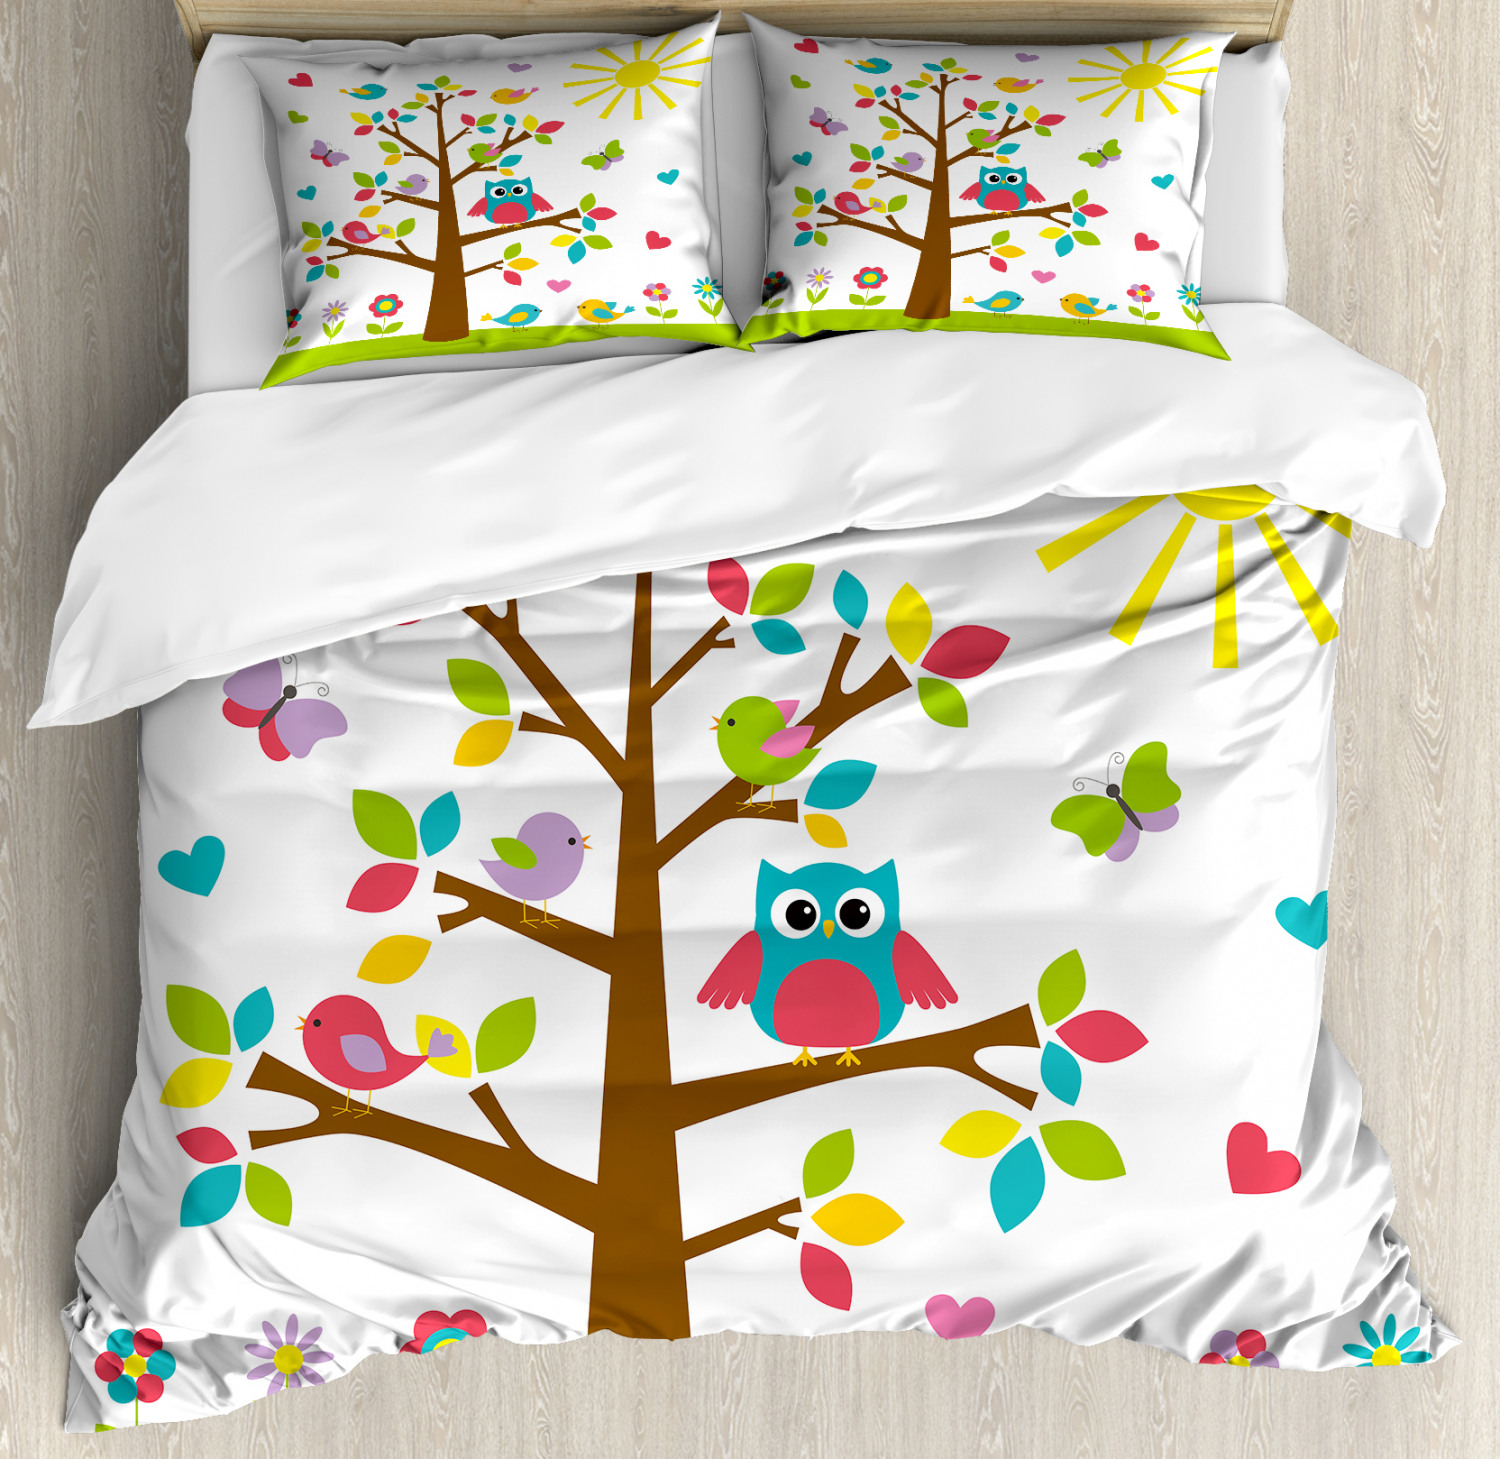 Nursery Duvet Cover Set With Pillow Shams Colorful Tree Cute Owl